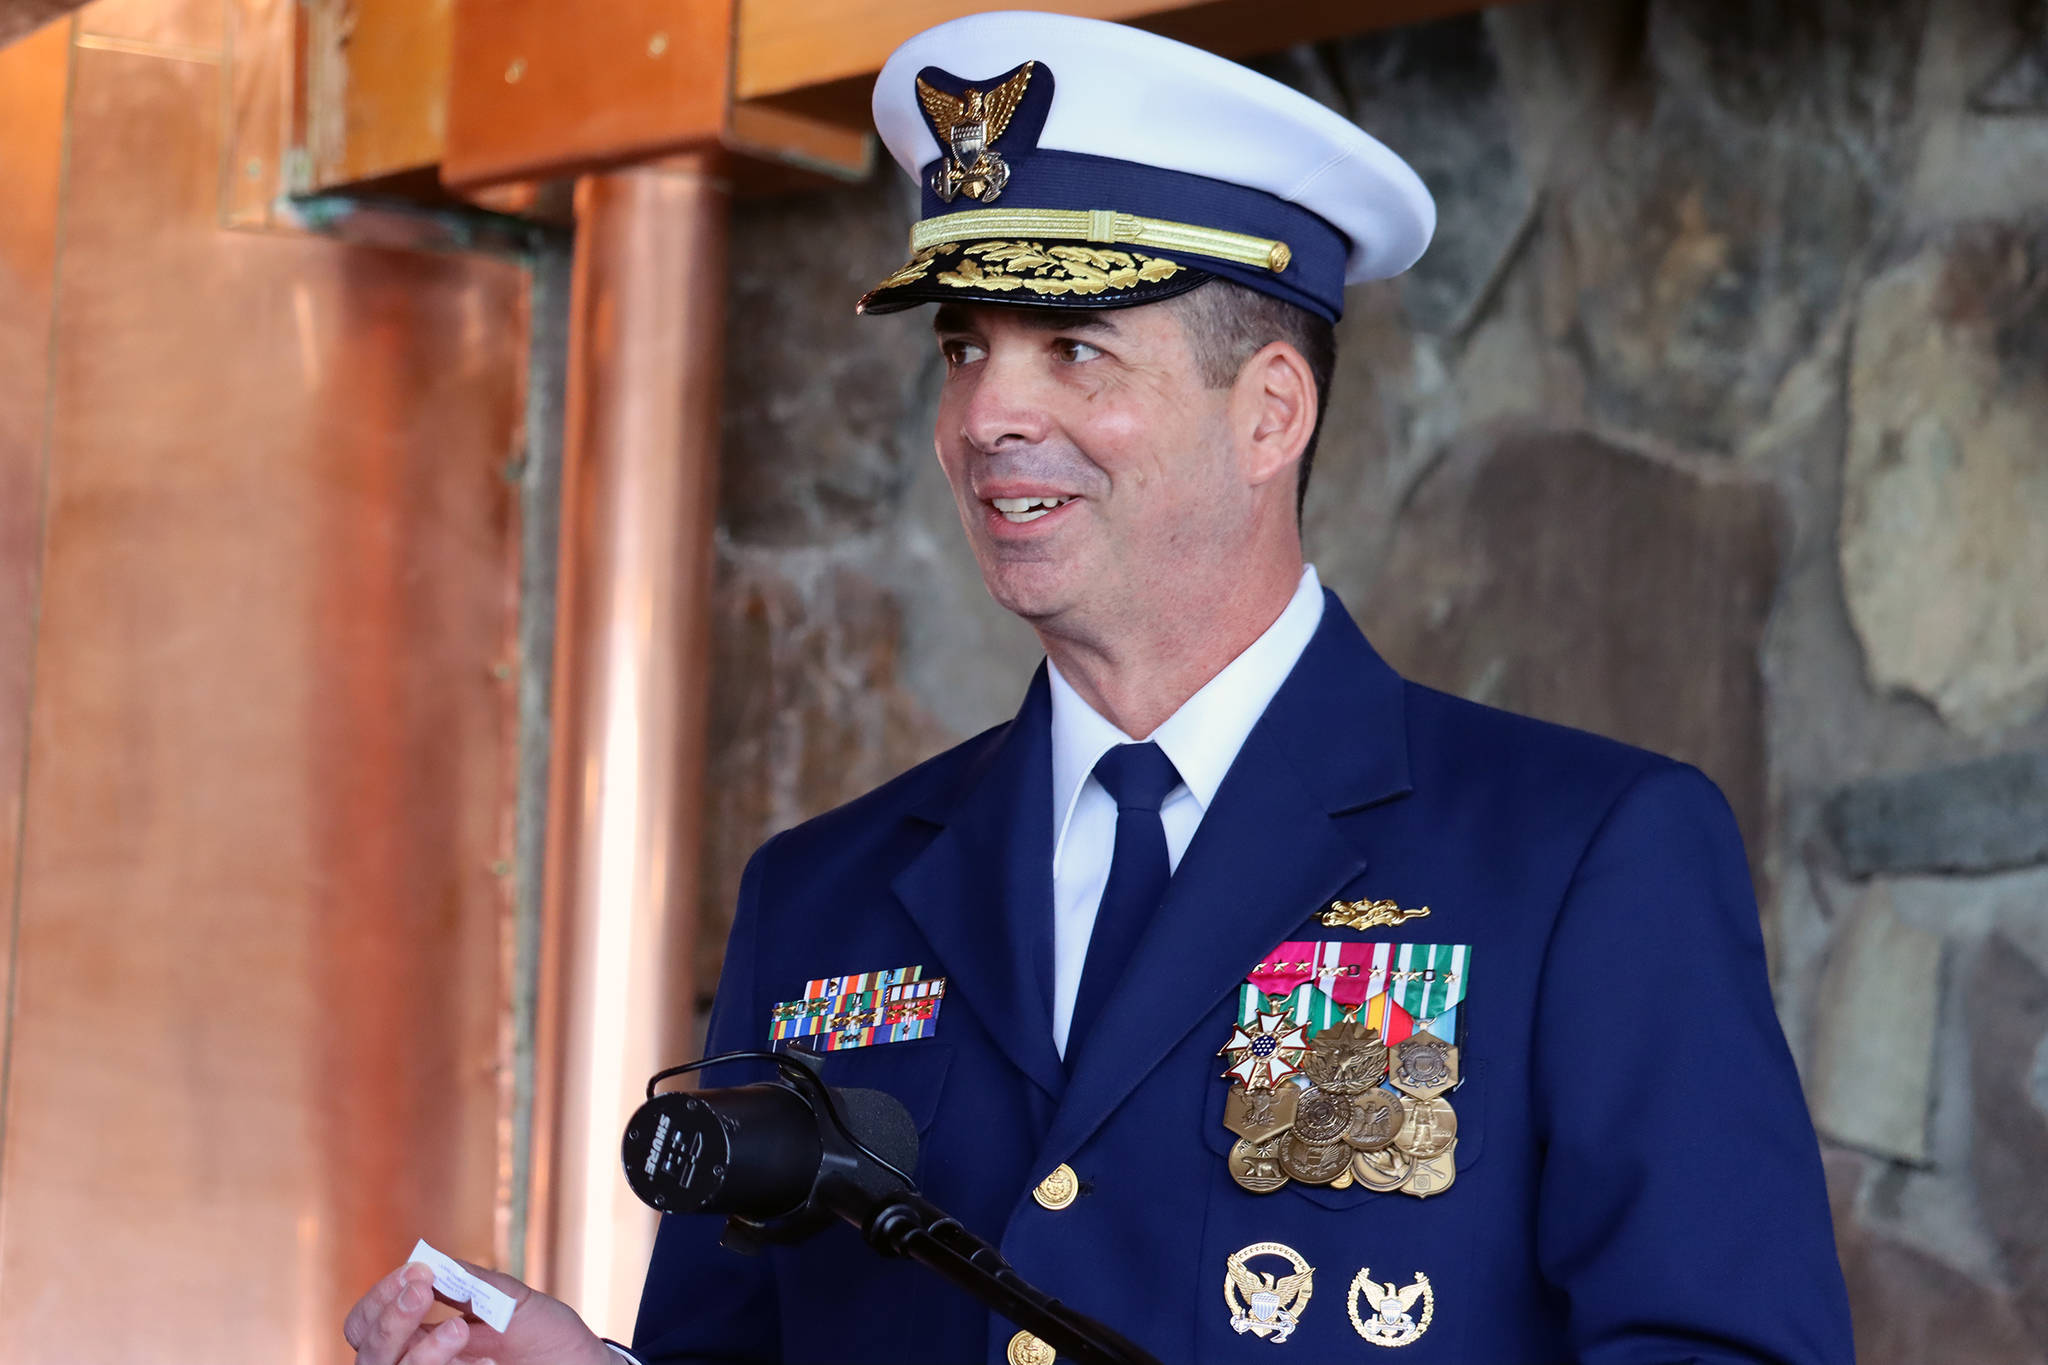 Ben Hohenstatt / Juneau Empire
Rear Adm. Nathan A. Moore, new commander for Coast Guard District 17, holds a fortune from a fortune cookie that reads “Blessed is that man who has found his work.” Moore said he received the fortune on his first day in Juneau and he found it fitting as he was poised to take his new post.